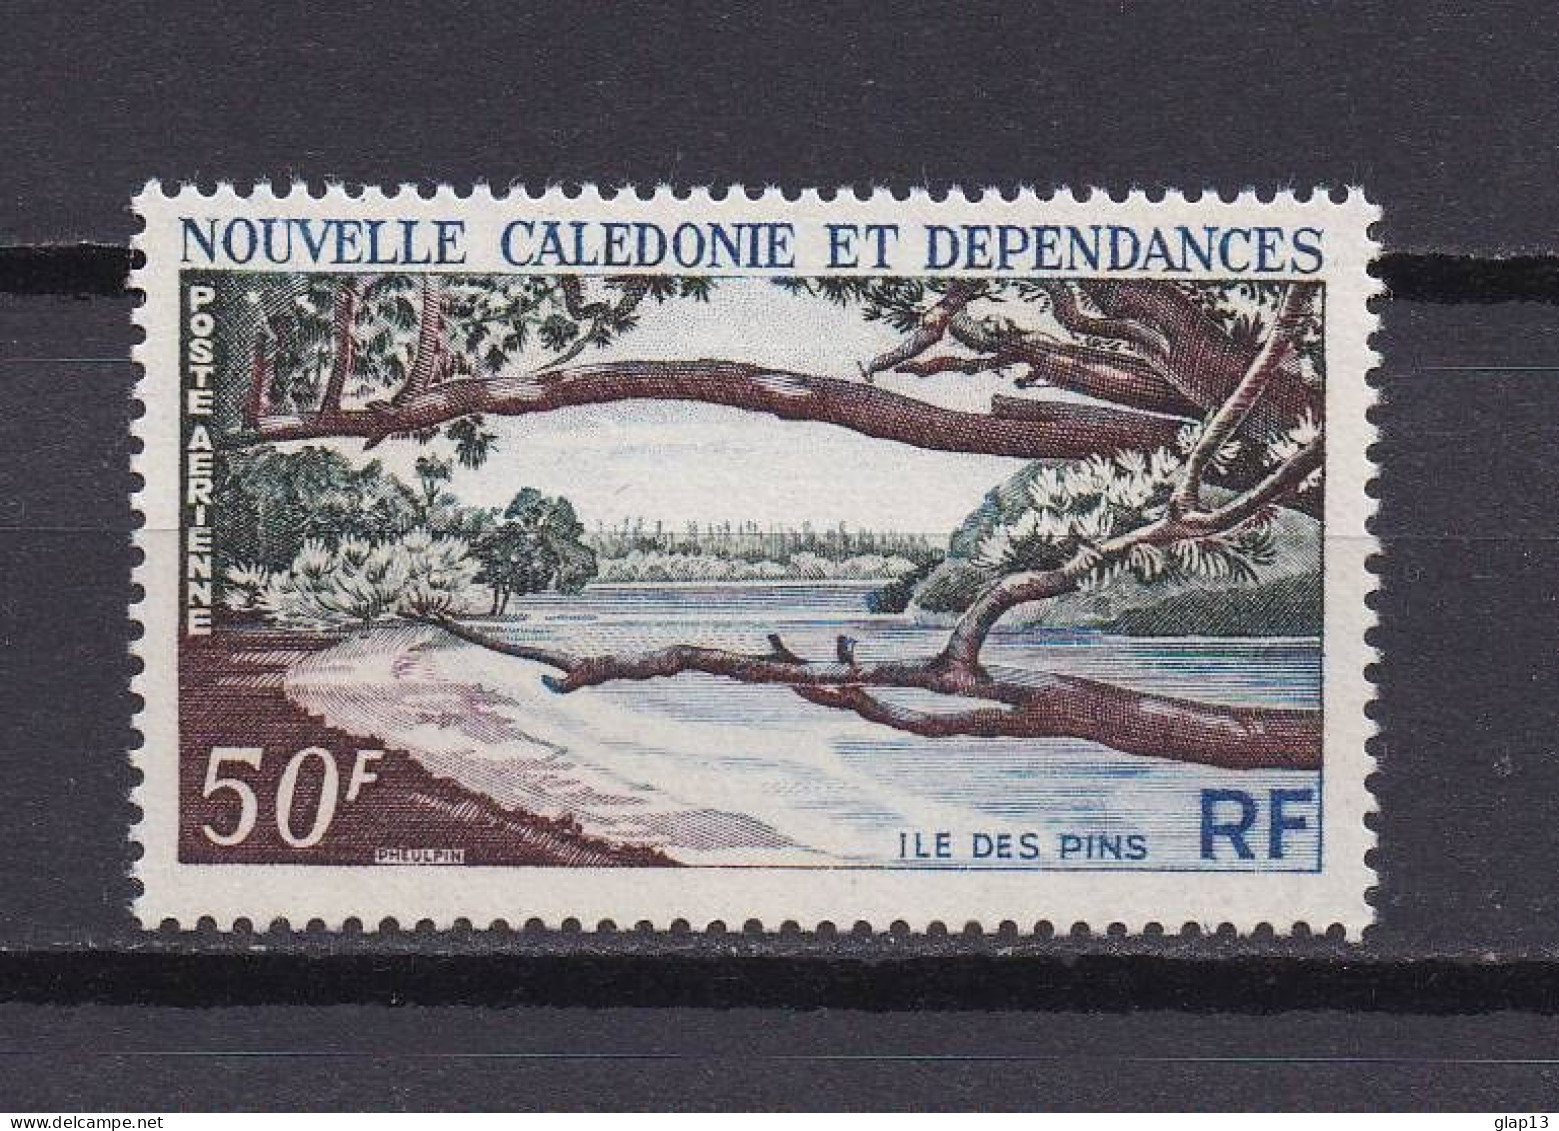 NOUVELLE-CALEDONIE 1964 PA N°75 NEUF AVEC CHARNIERE - Neufs